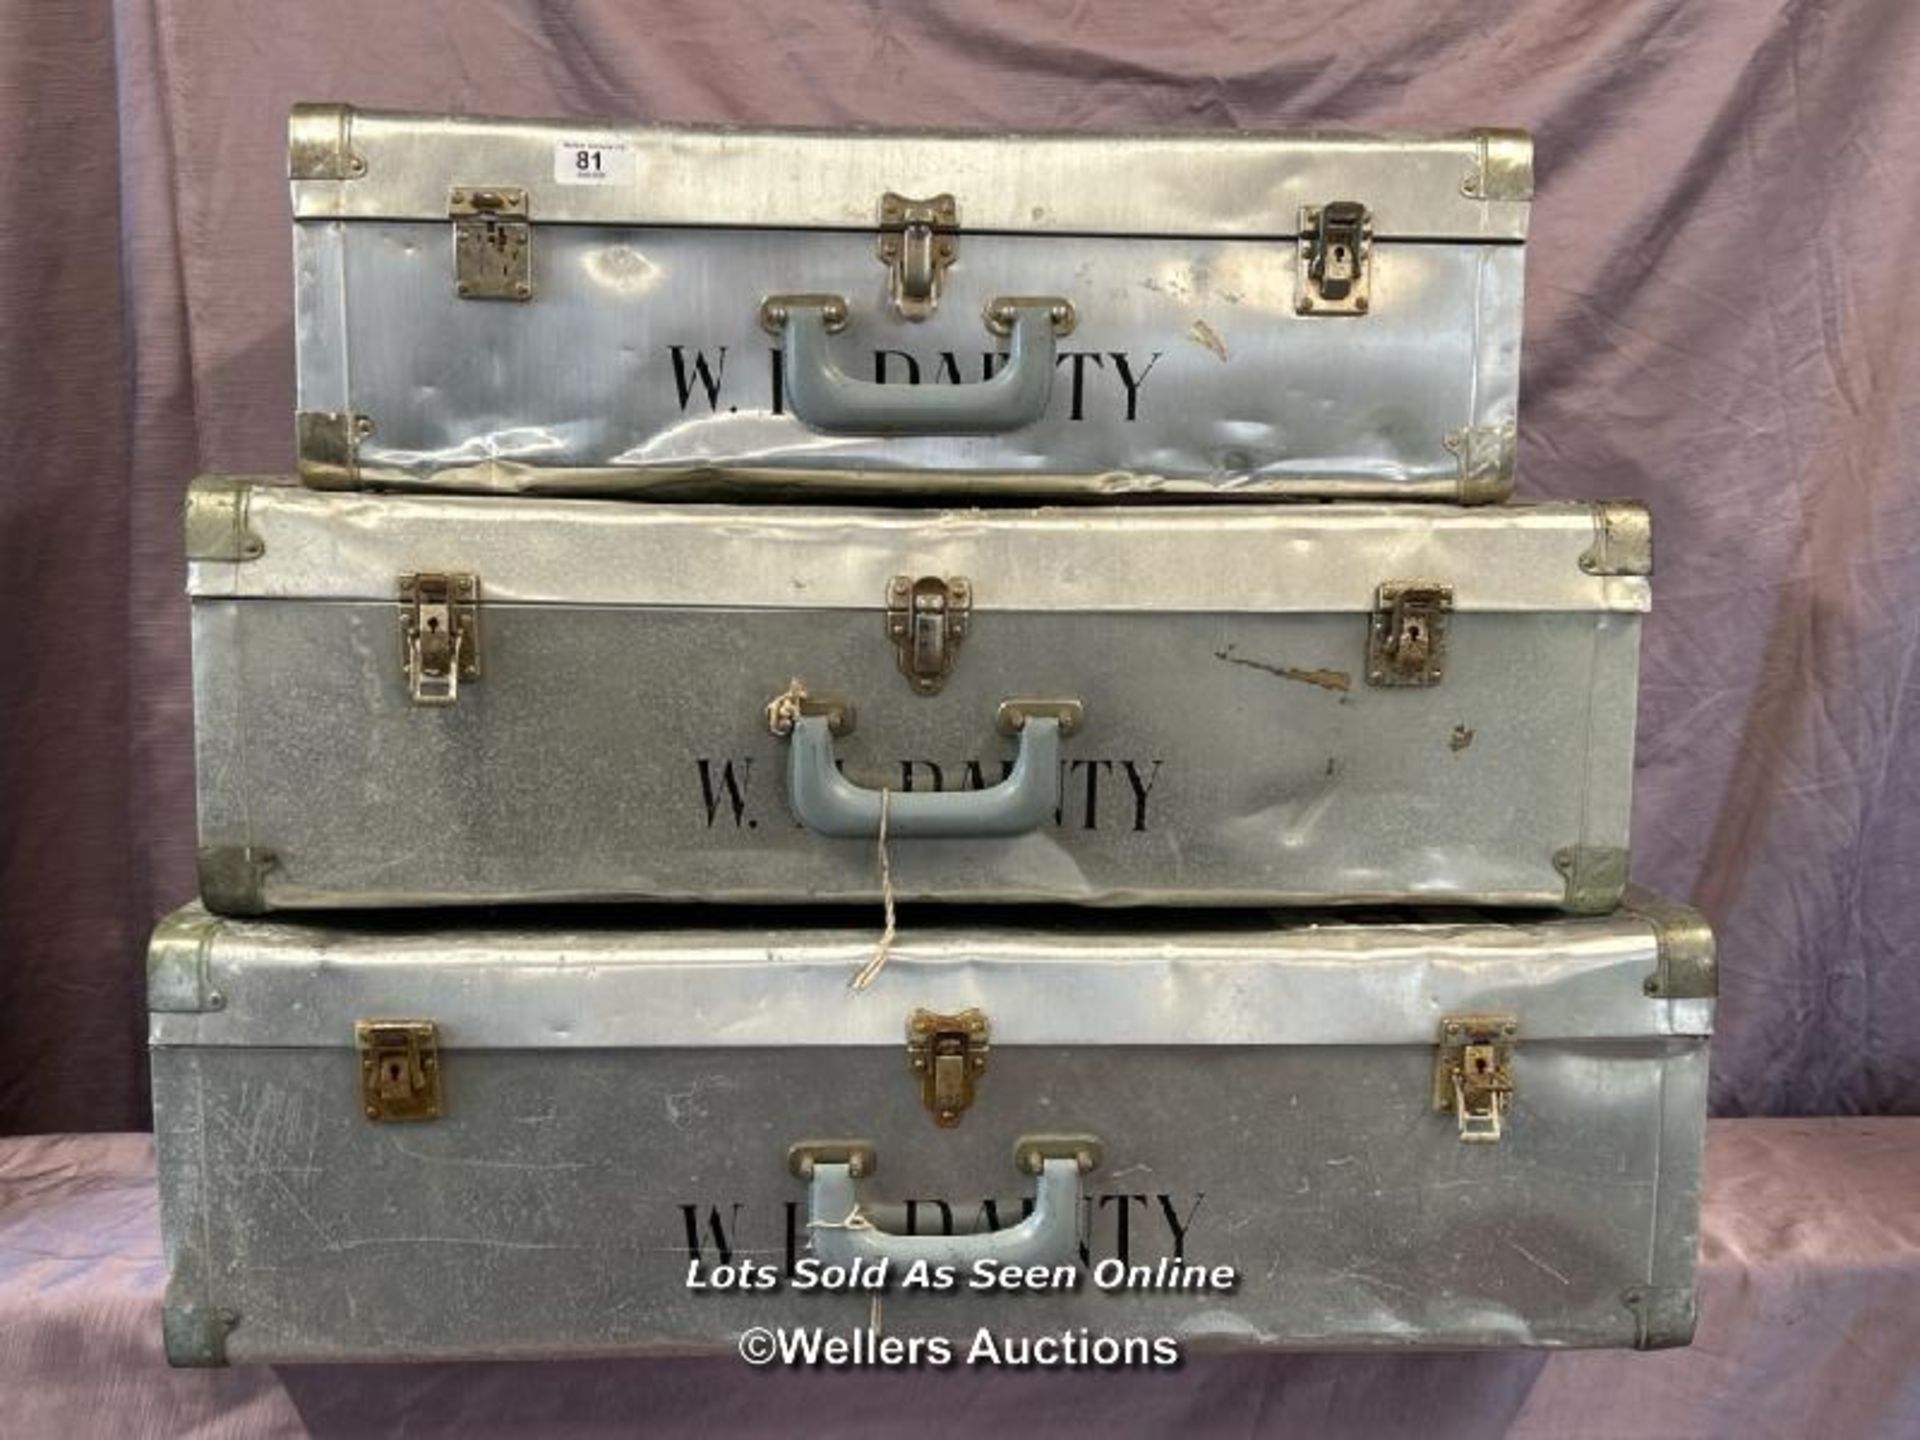 THREE ORIGINAL FLIGHT CASES OWNED BY BILLY DAINTY, A COMEDIAN AND DANCER WHO ENTERTAINED THE